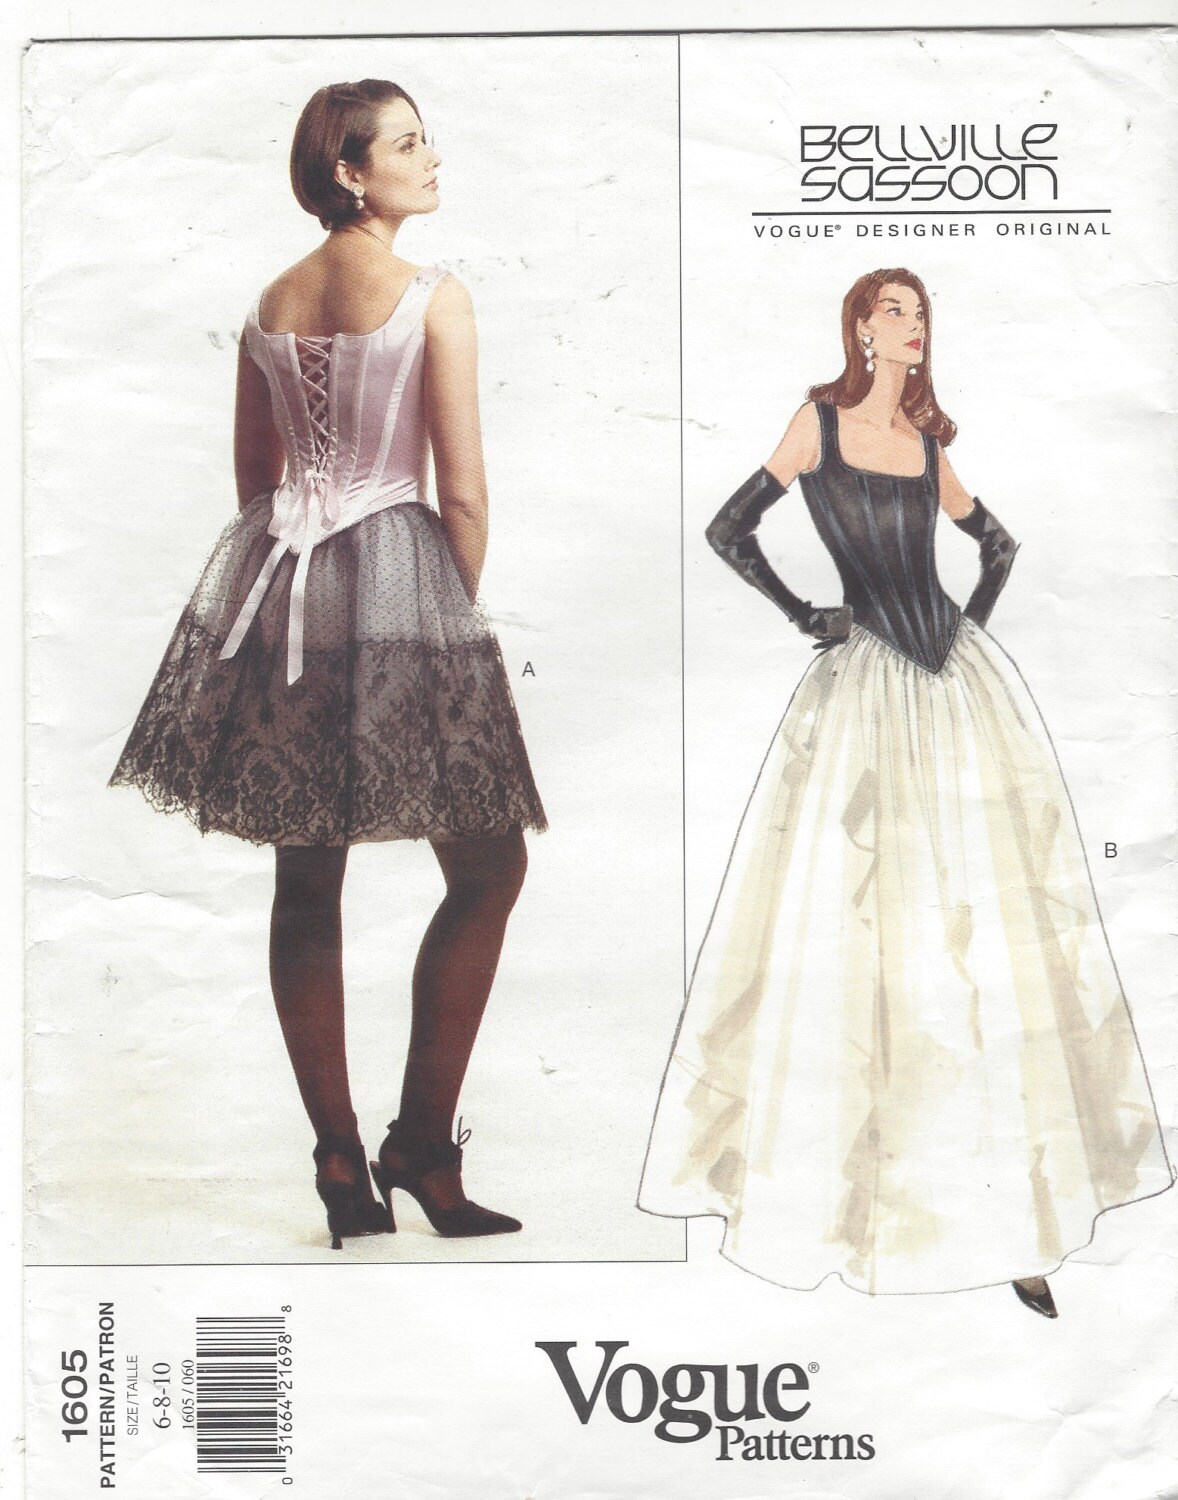 Buy Bellville Sassoon Womens Corset Top & Full Skirt Long or Short Vogue  Sewing Pattern 1605 Size 6 8 10 Bust 30 1/2 to 32 FF Online in India 